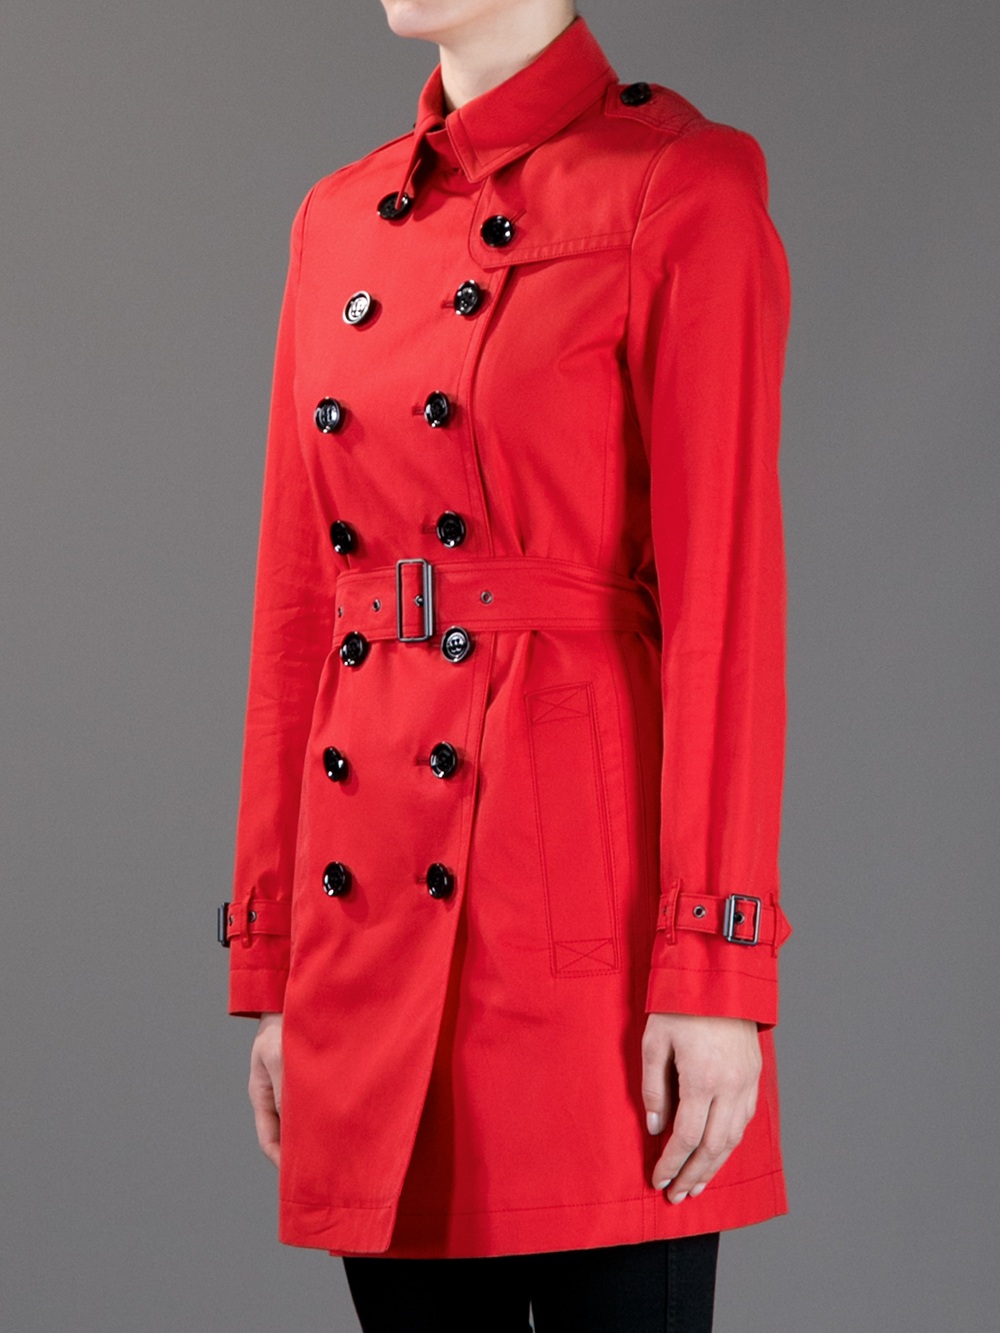 Burberry Brit Classic Trench Coat in Red - Lyst